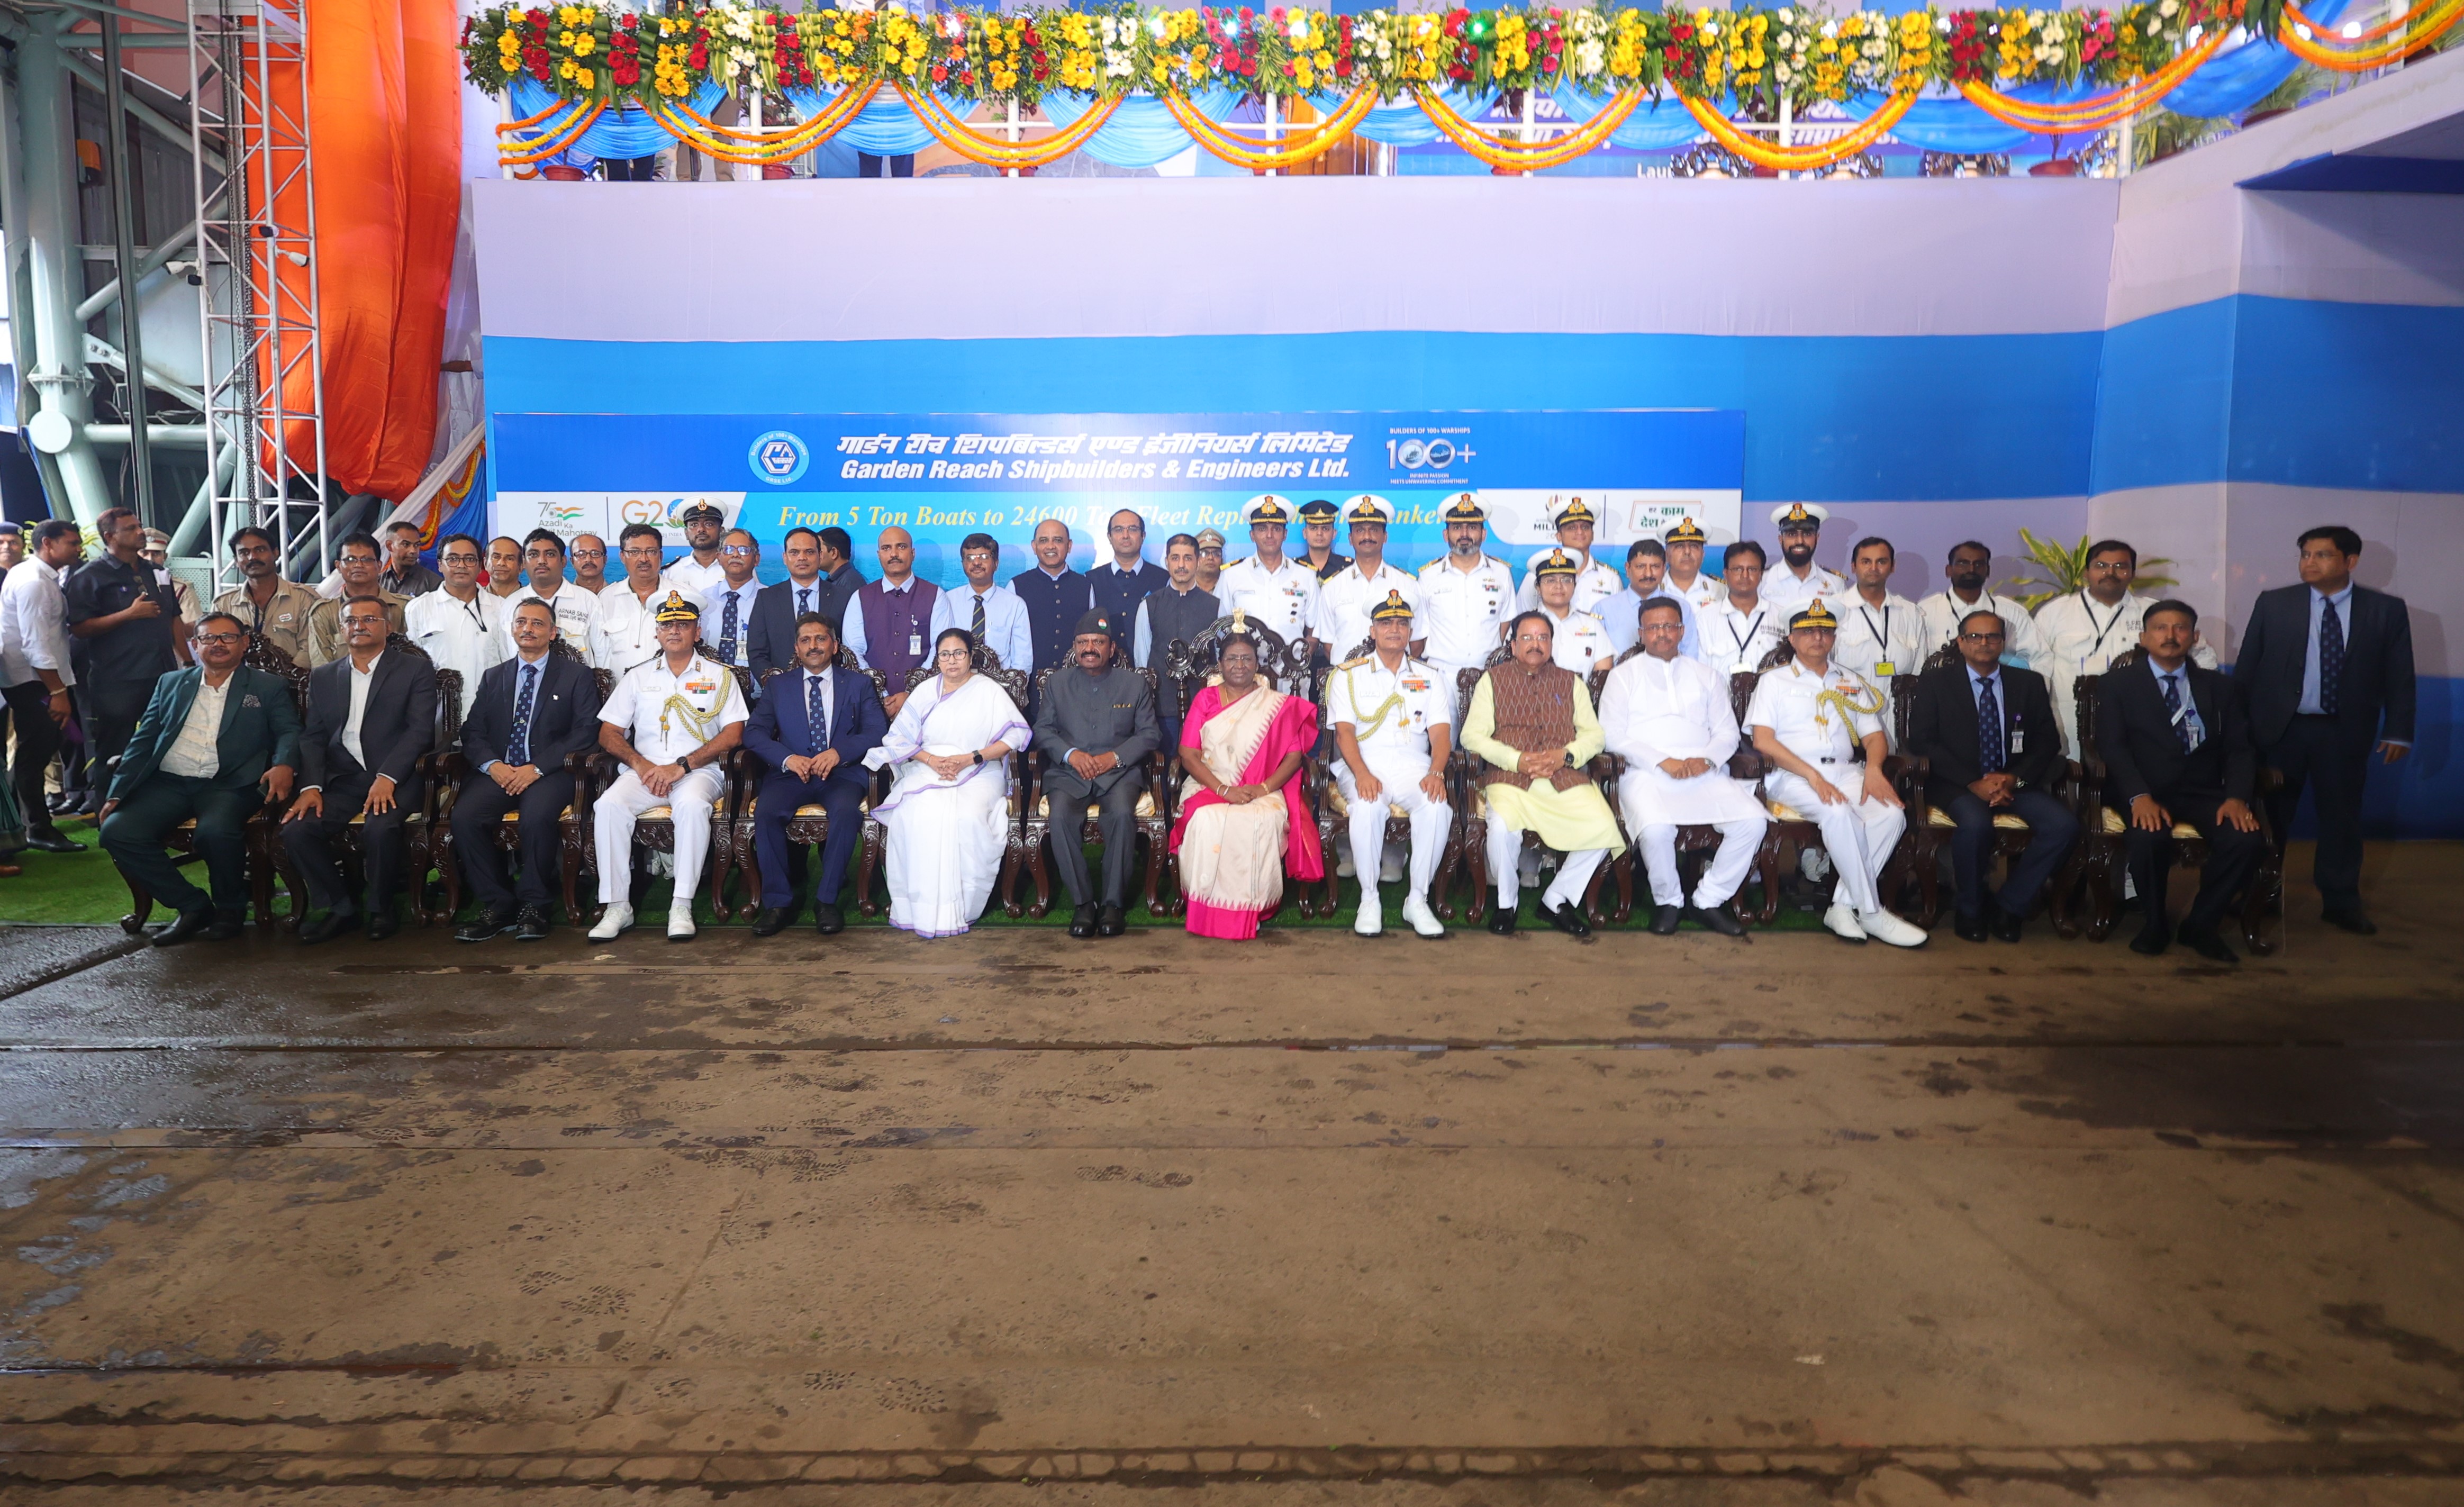 Launching of the 3rd Project 17A Advanced Frigate 'INS VINDHYAGIRI' on 17 Aug 23